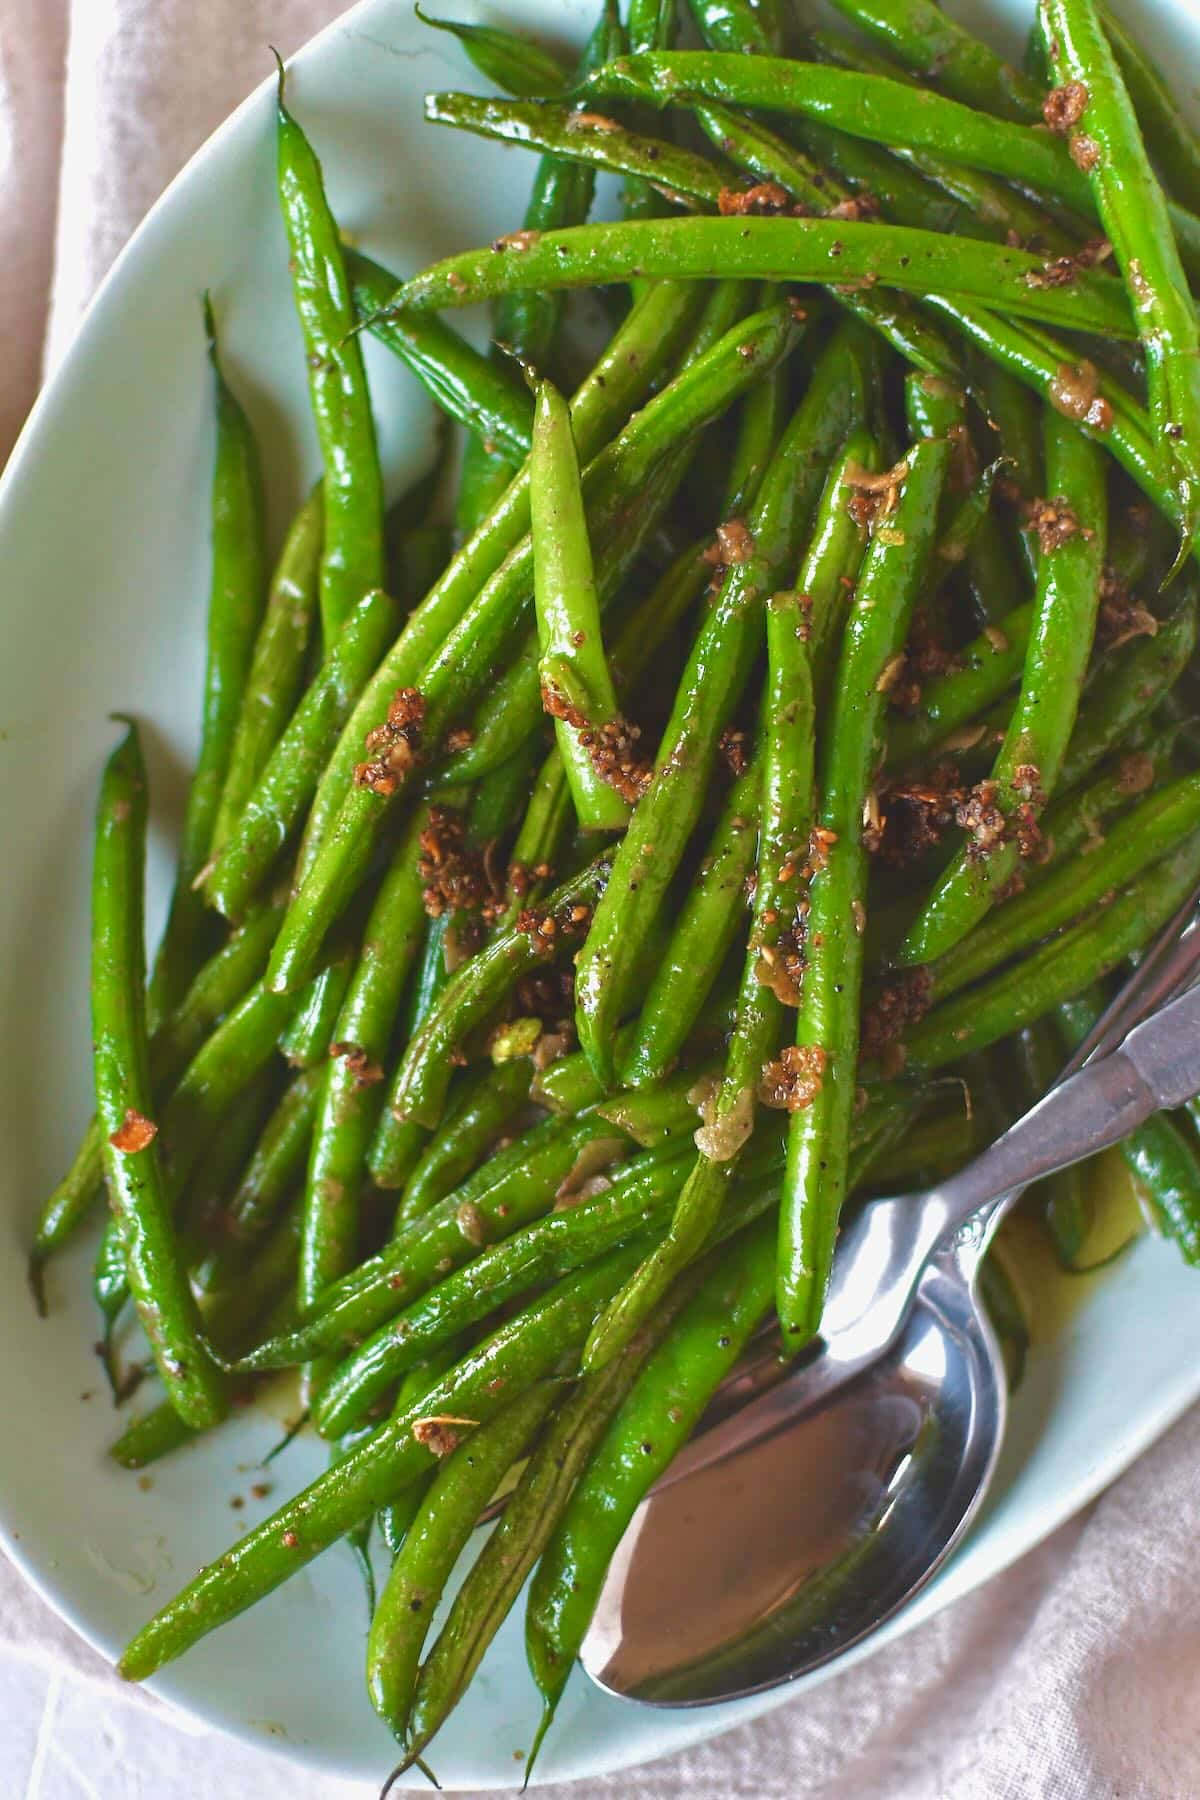 Sautéed Green Beans fresh out of the skillet with all the cooked garlic bits on top.